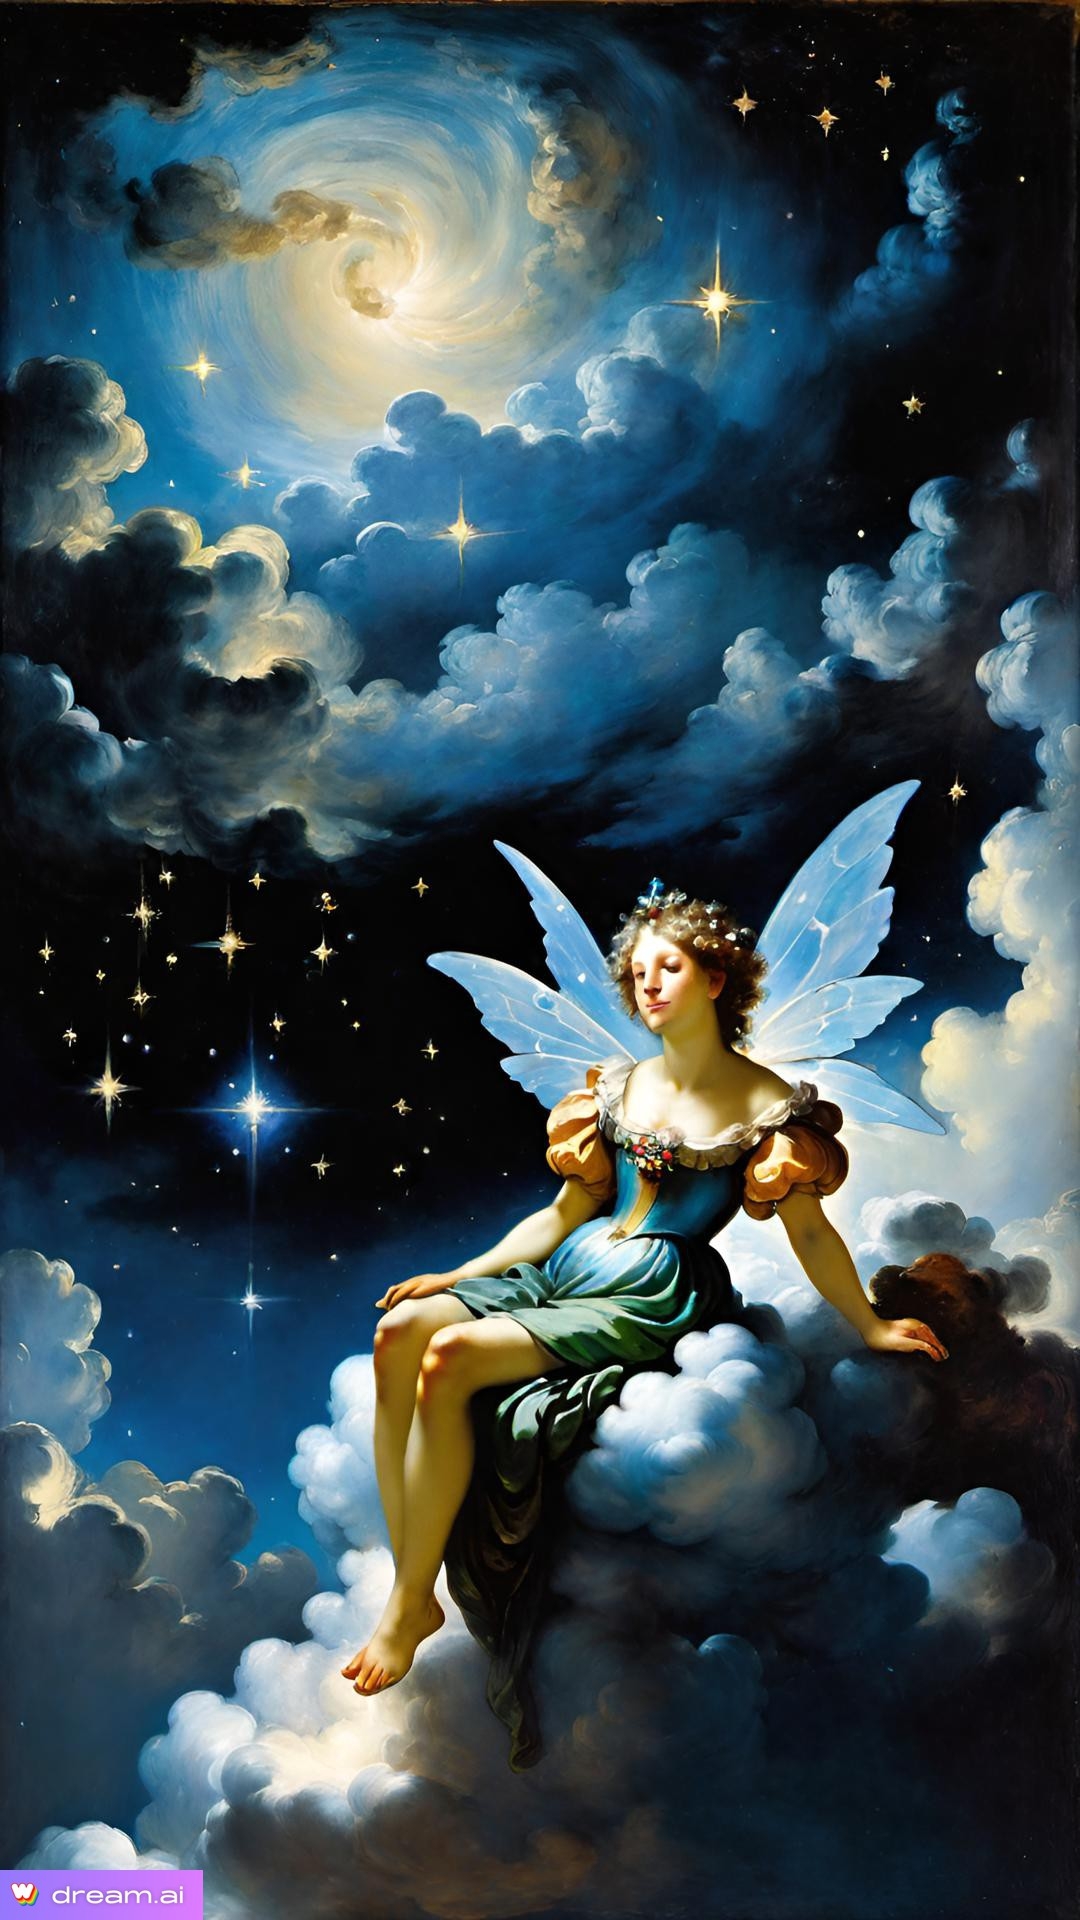 a painting of a woman sitting on a cloud with stars and a moon